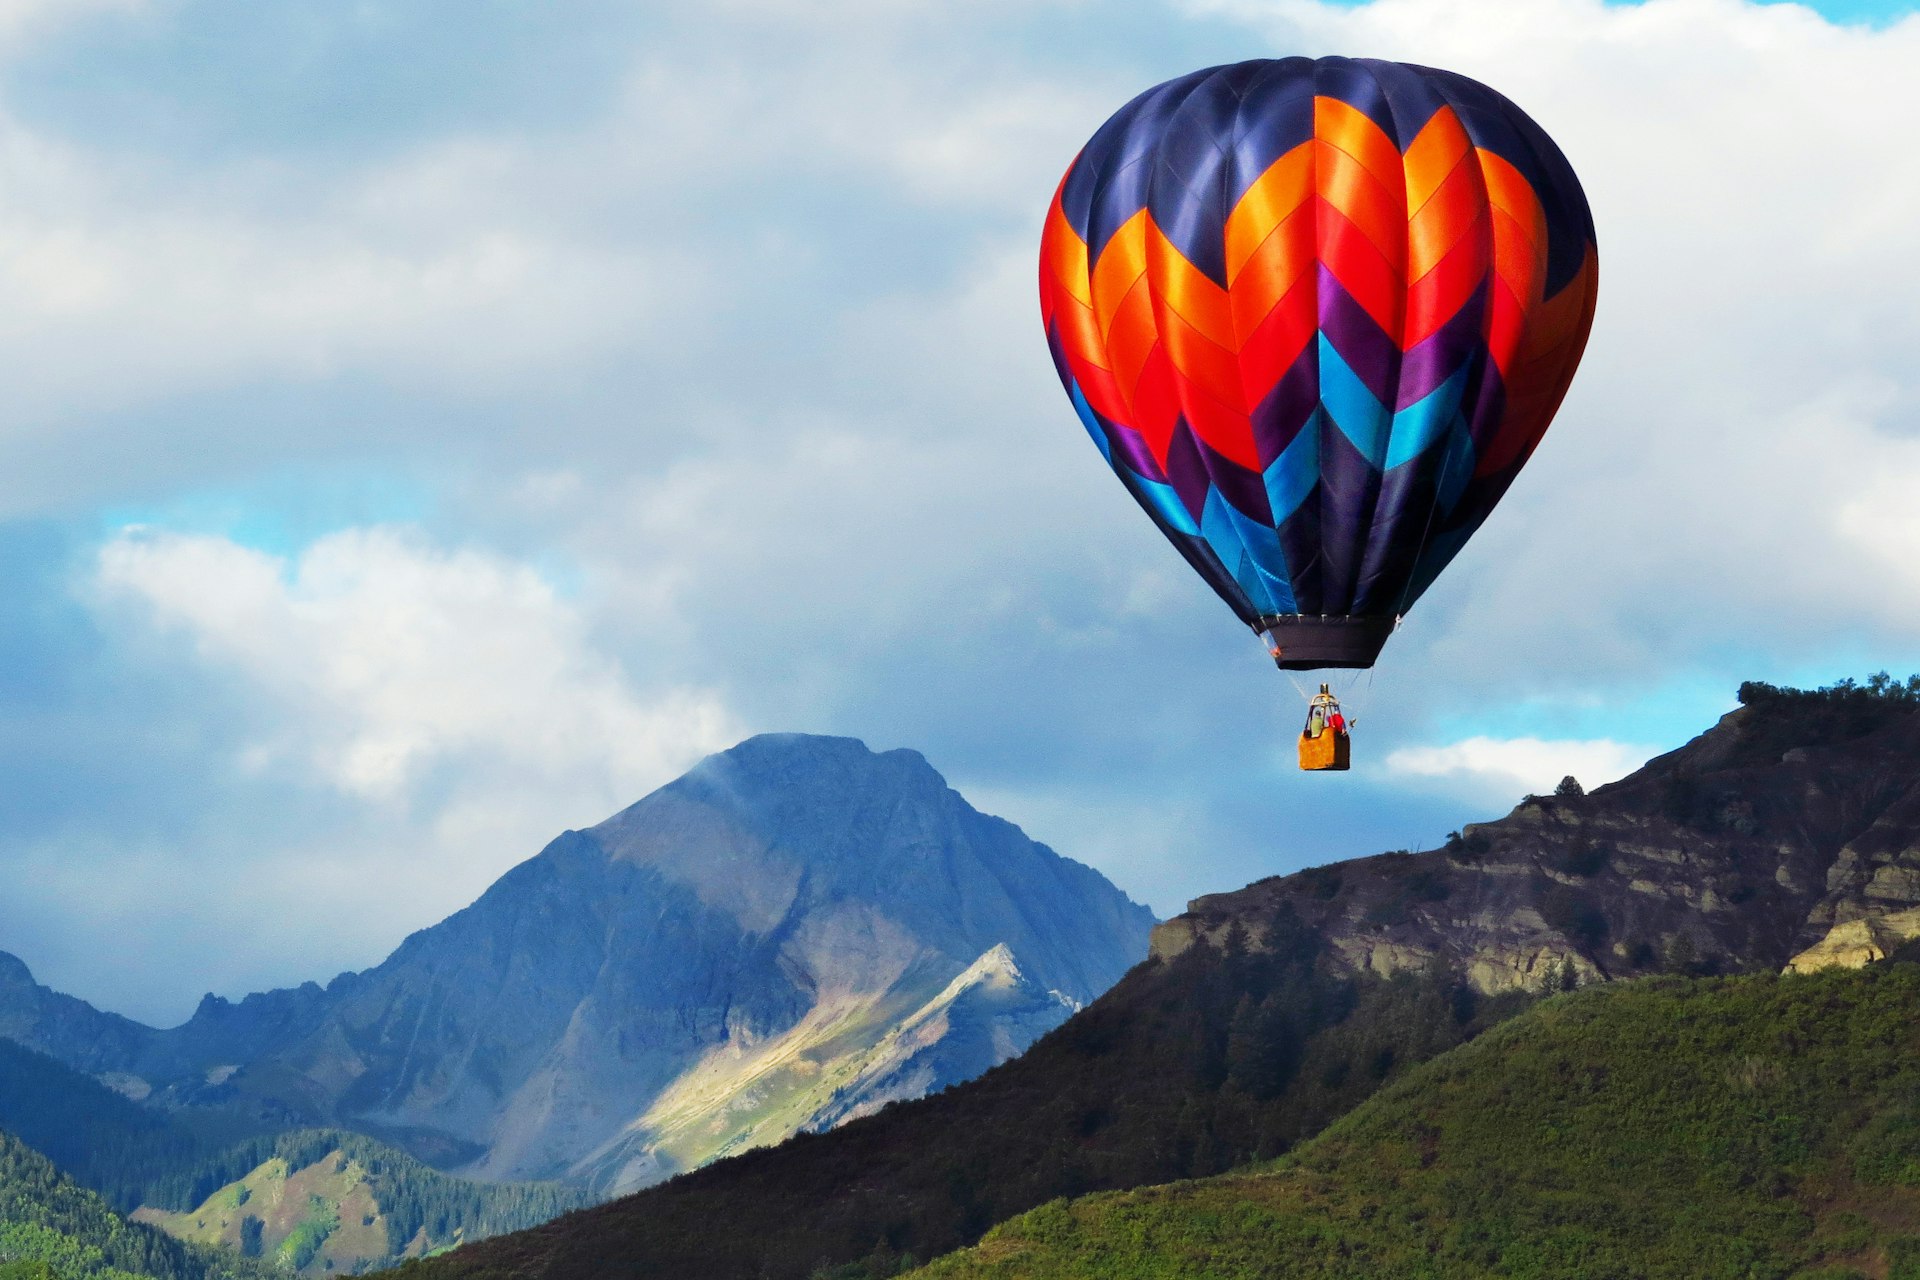 A hot air balloon takes off in front of Mount Daly in the Maroon Bells-Snowmass Wilderness Area. Image by Sandra Leidholdt / Getty